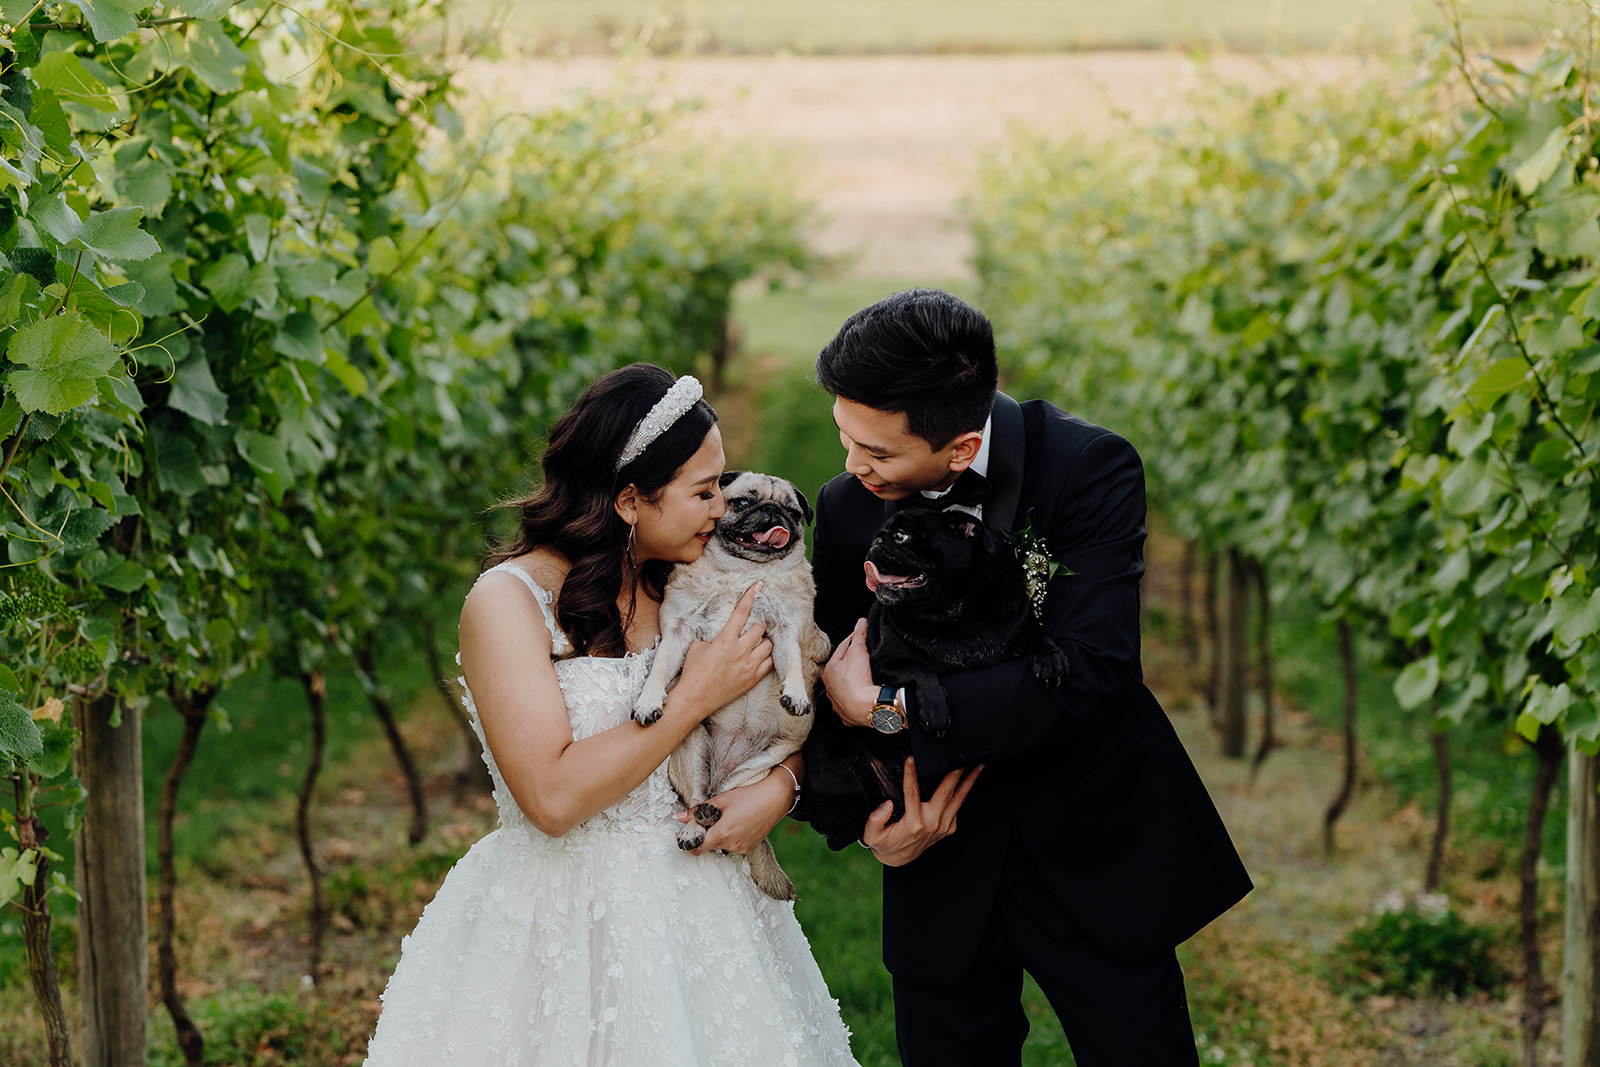 A bride and groom holding their pet pugs during their wedding portrait photoshoot at Vilagrad Winery, photographed by Haley Adele Photography